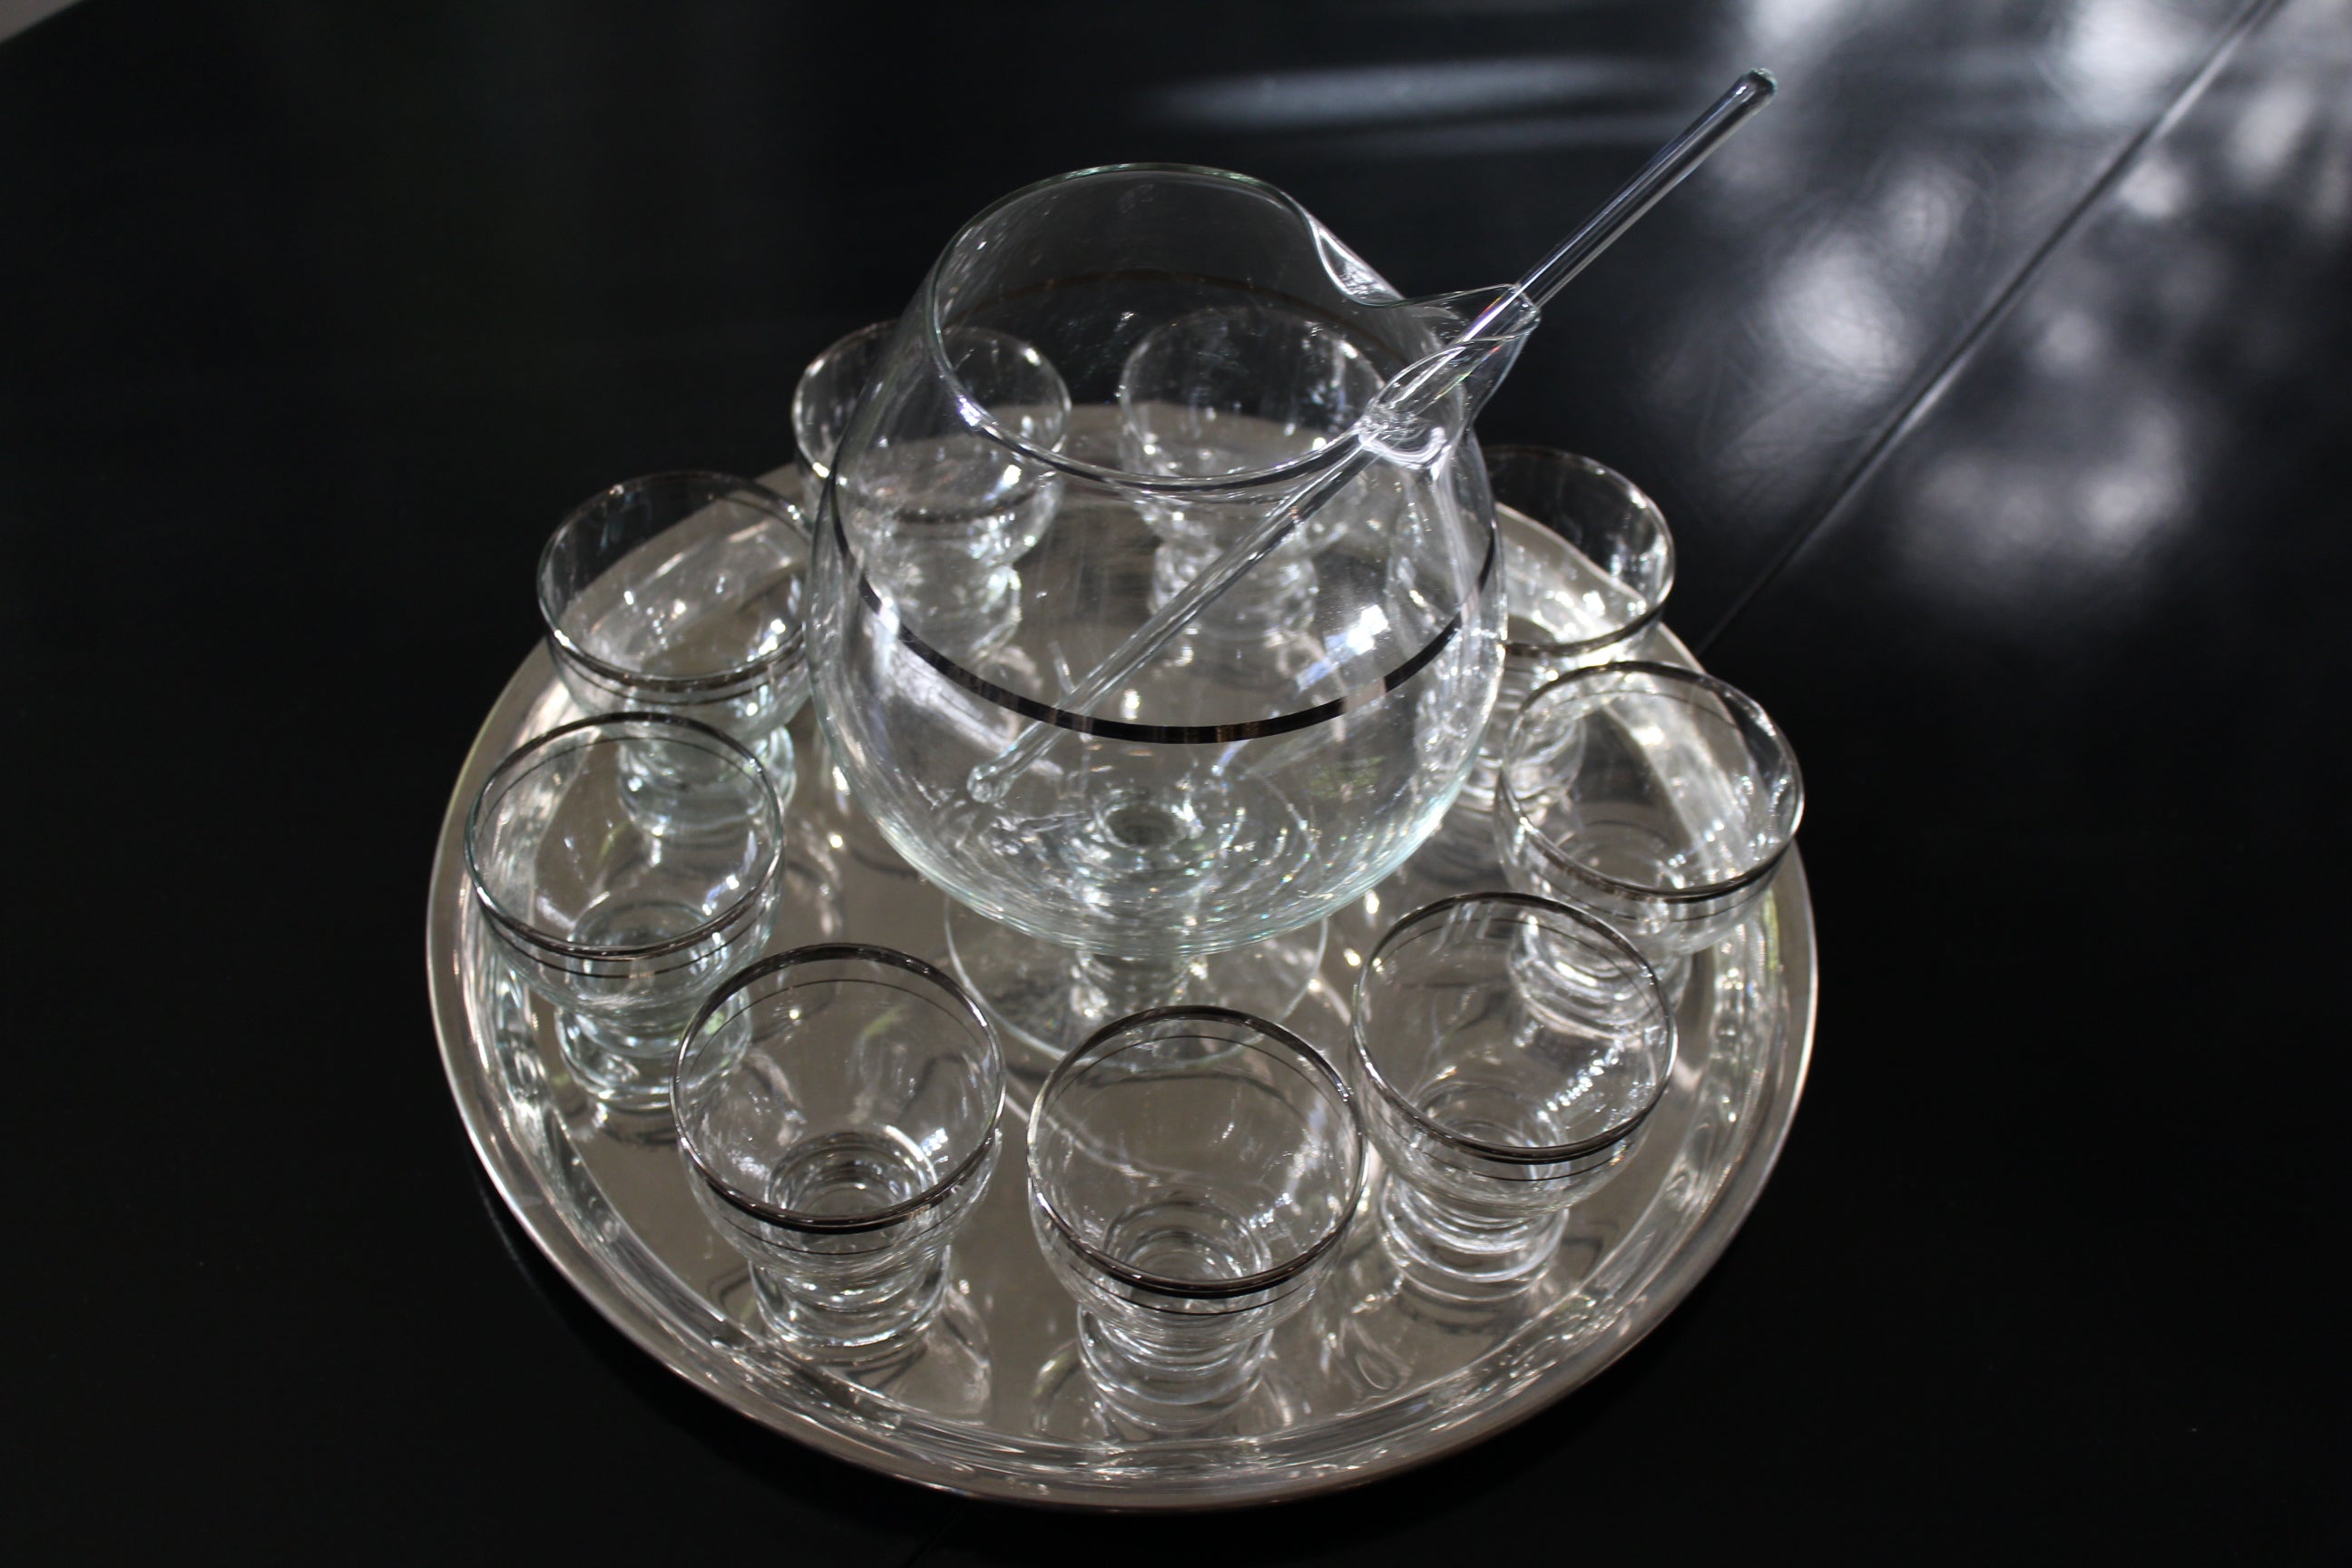 Martini Set Consisting of Pitcher, Tray, Nine Glasses and Stirrer